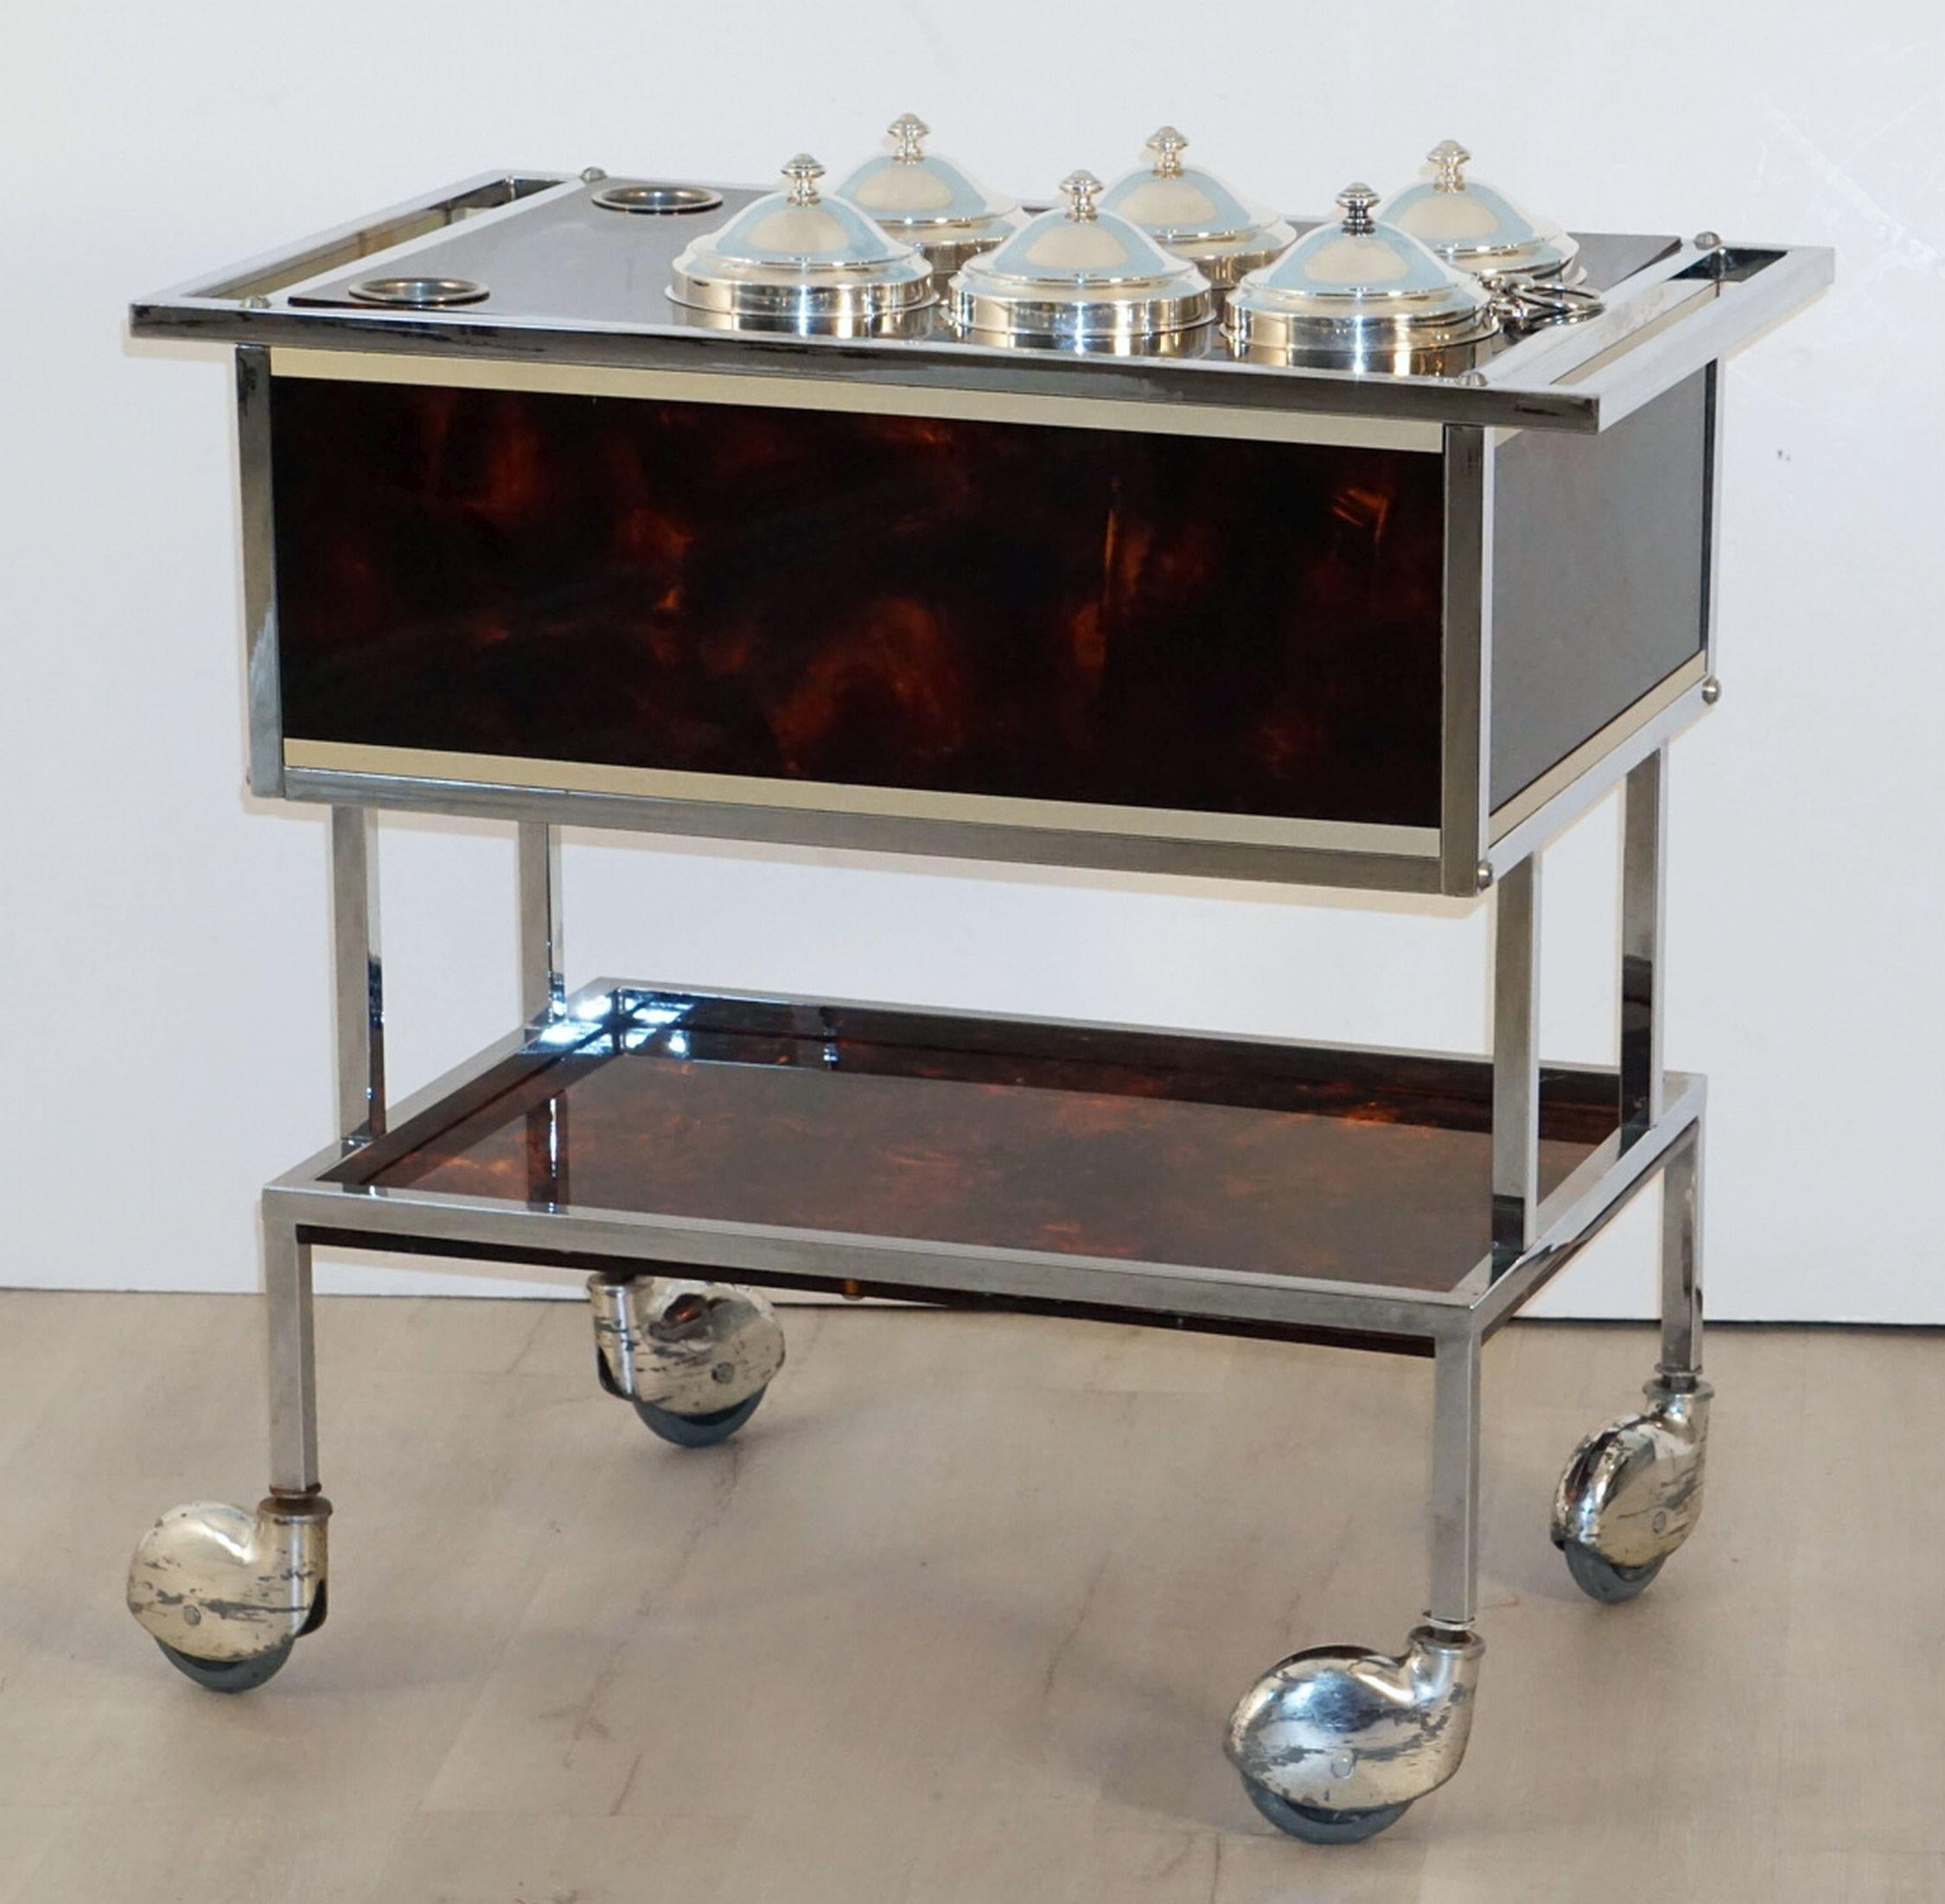 A fine Italian ice cream cart of chrome and faux tortoise shell, featuring a rectangular body with handle and six compartments with removable covered lids, two slots for ice cream scoops, a lower shelf, and set upon rolling casters.

Height with